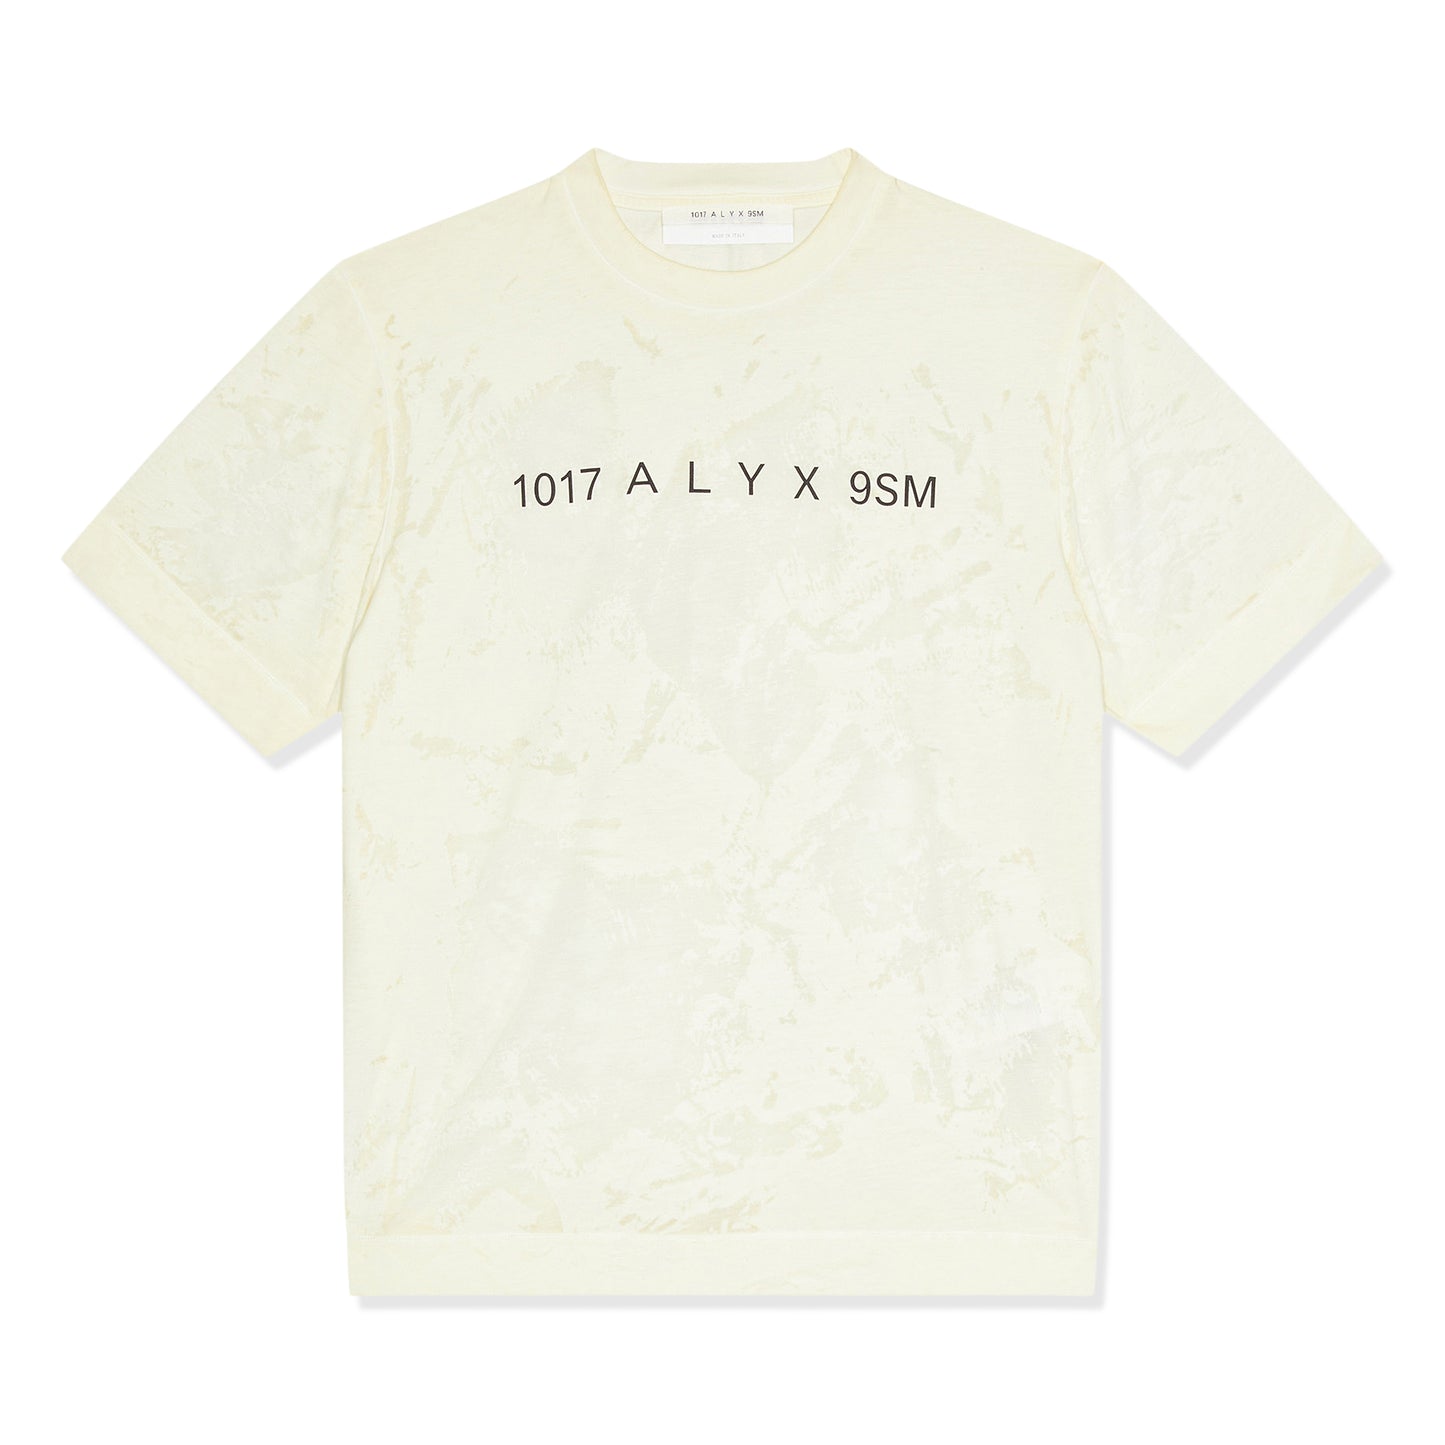 1017 ALYX 9SM Translucent Graphic Tee (Dirty Off White)